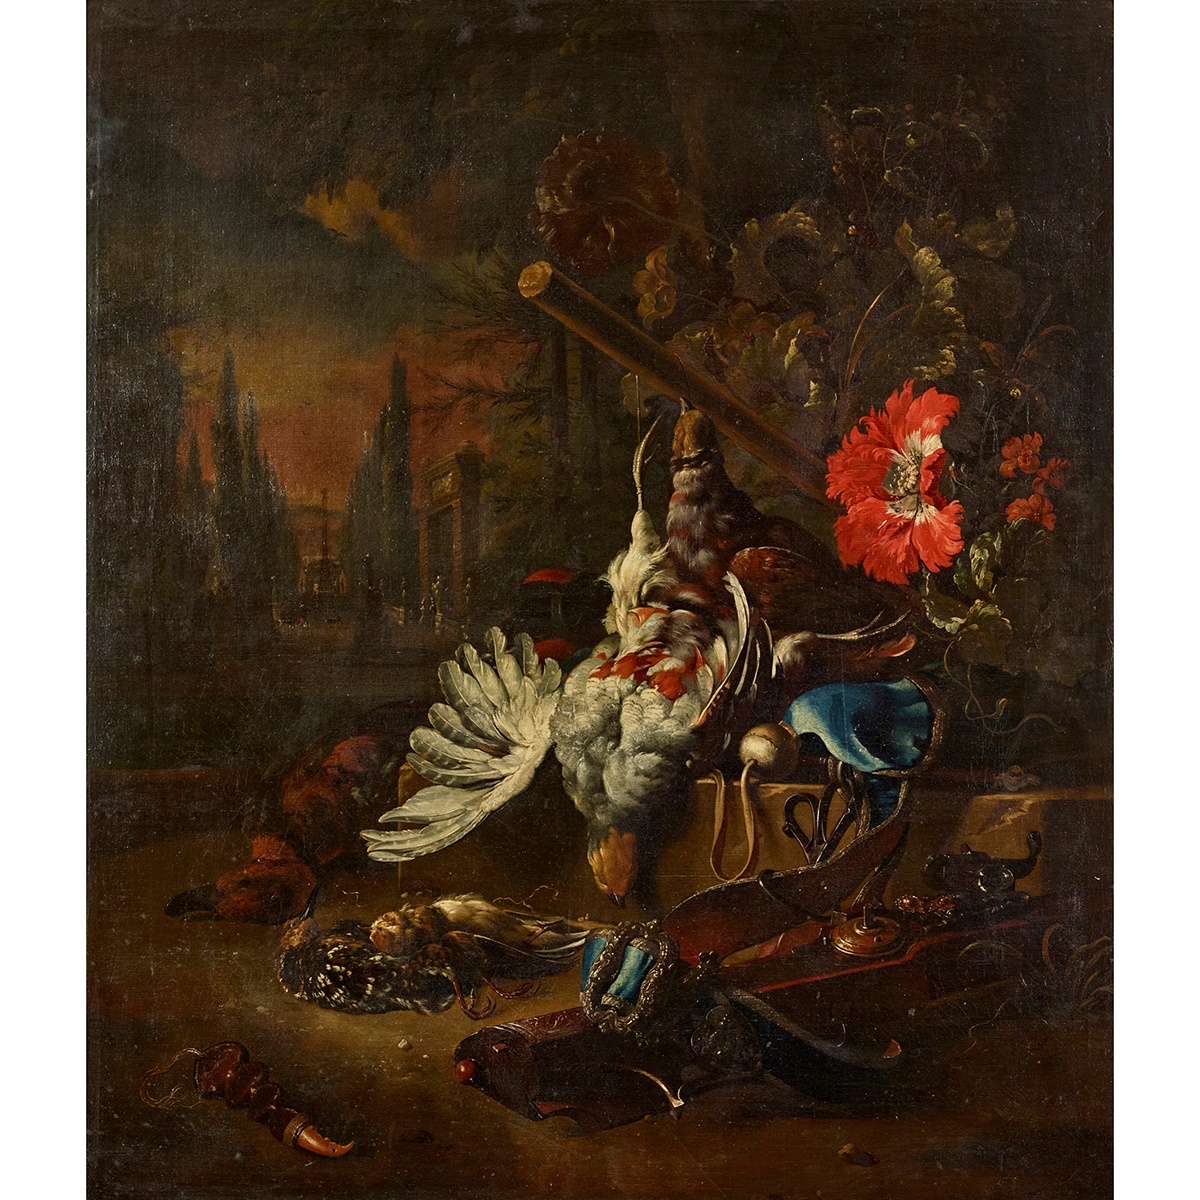 MANNER OF JAN WEENIX THE YOUNGER A STILL LIFE OF DEAD GAME, A FORMAL GARDEN IN THE DISTANCE